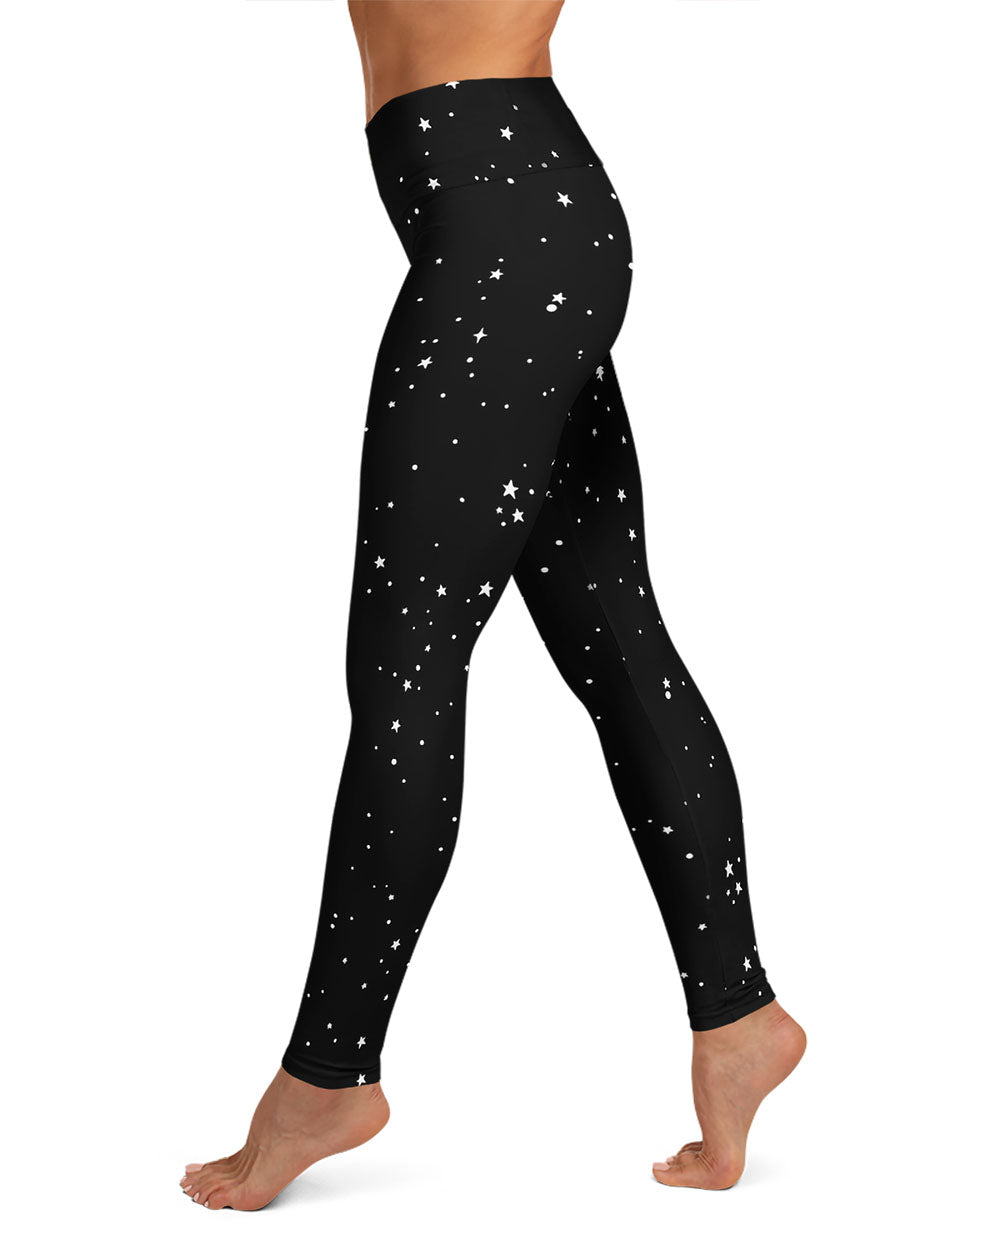 Cat Leggings, Cat Tights, Cat Lovers Gift, Yoga Pant, Printed Leggings,  Workout Leggings, Yoga Leggings, Cat Clothes, Black and White, XS-XL -   Canada